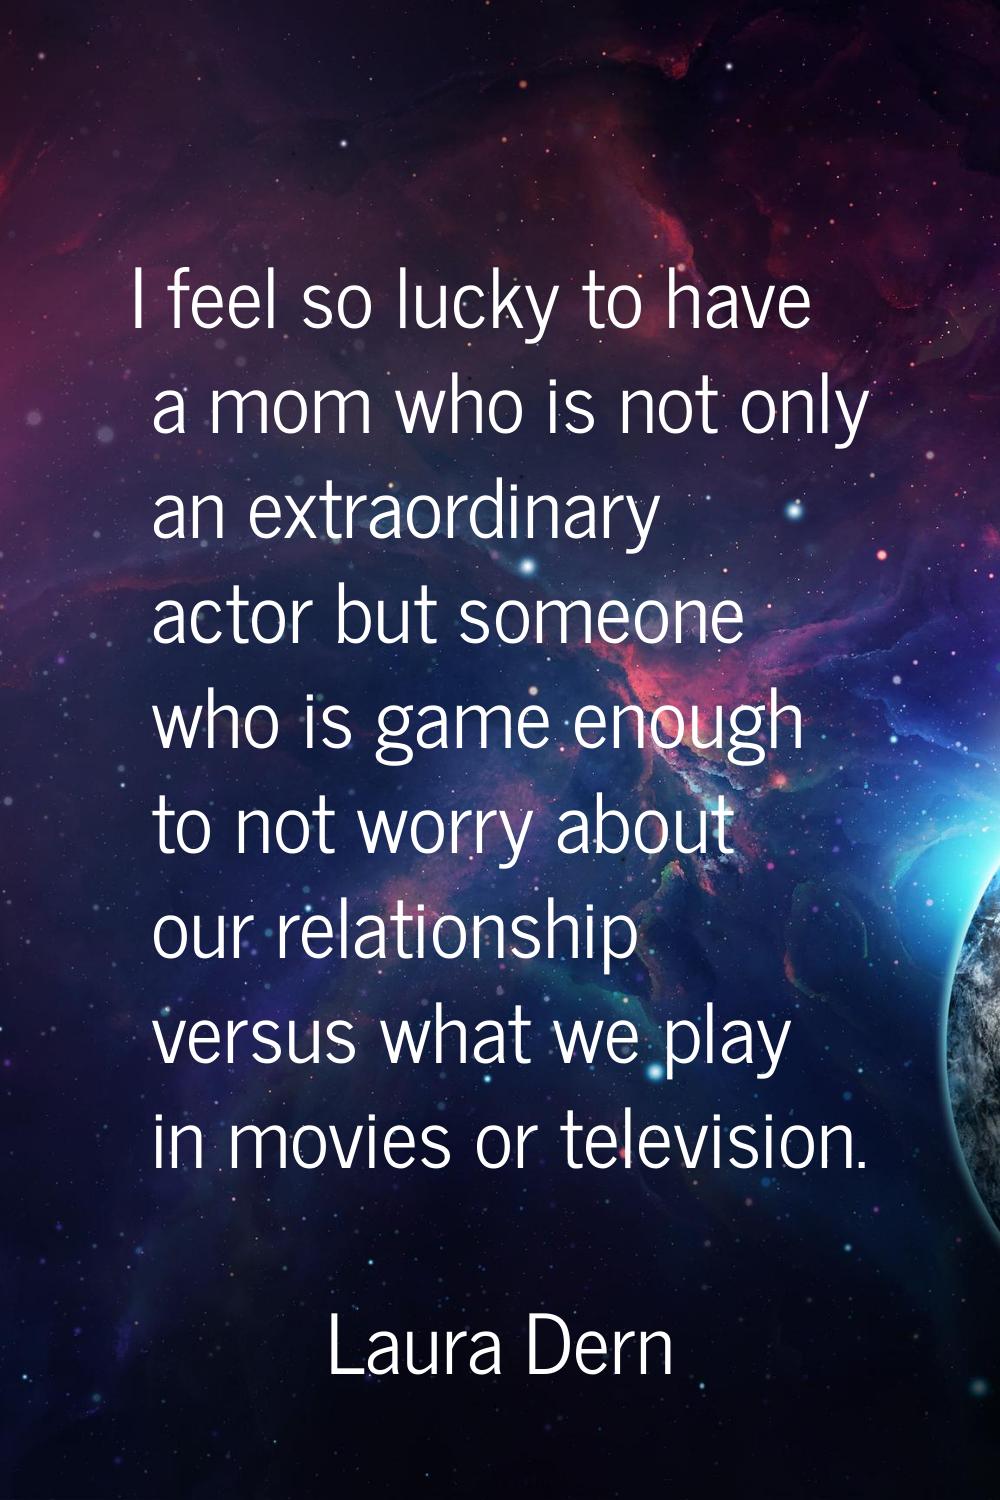 I feel so lucky to have a mom who is not only an extraordinary actor but someone who is game enough